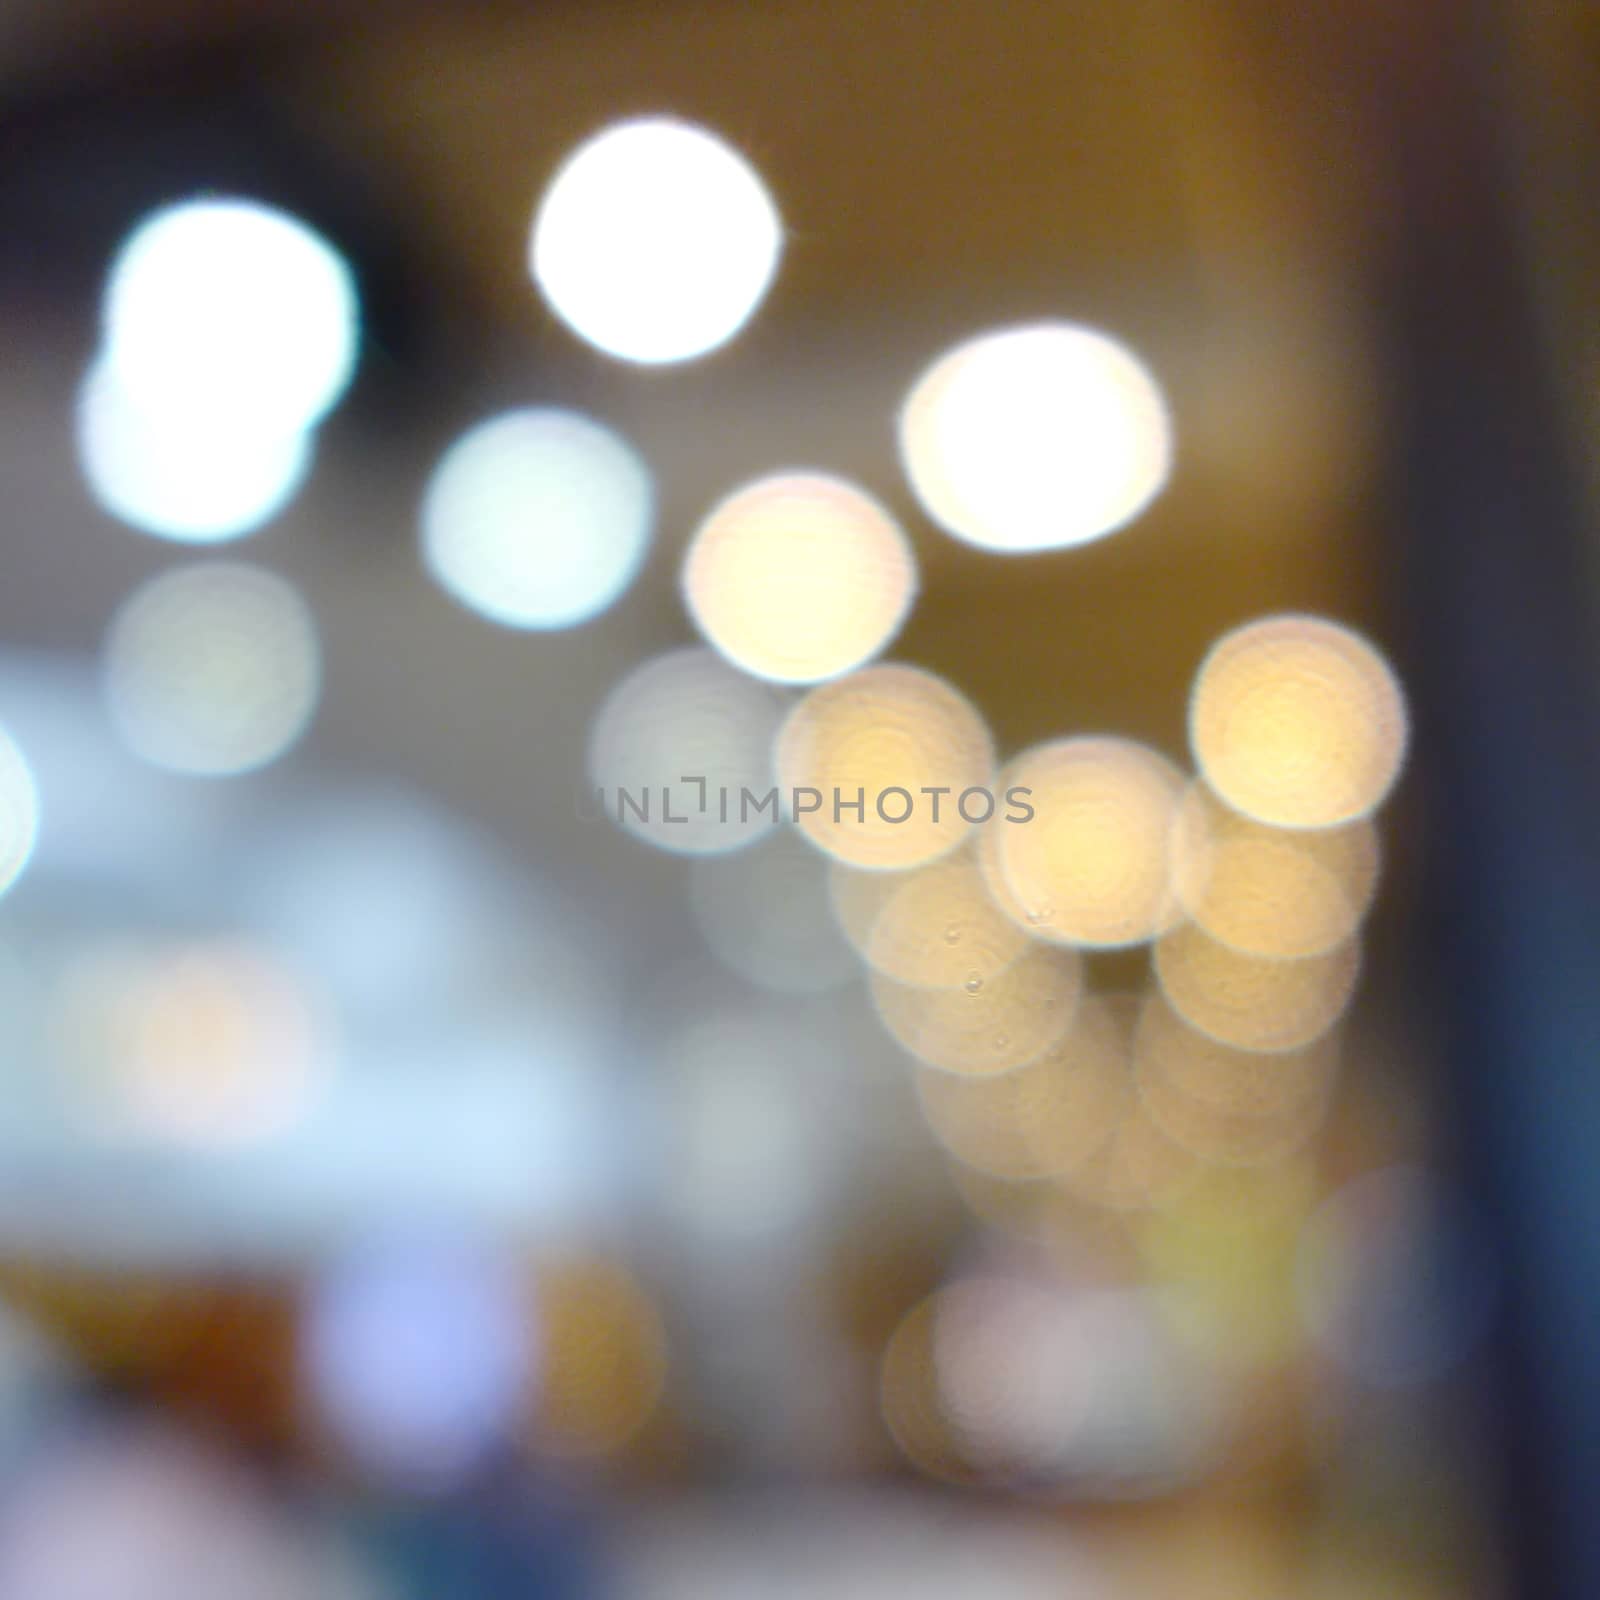 Abstract blurred background with bokeh of light